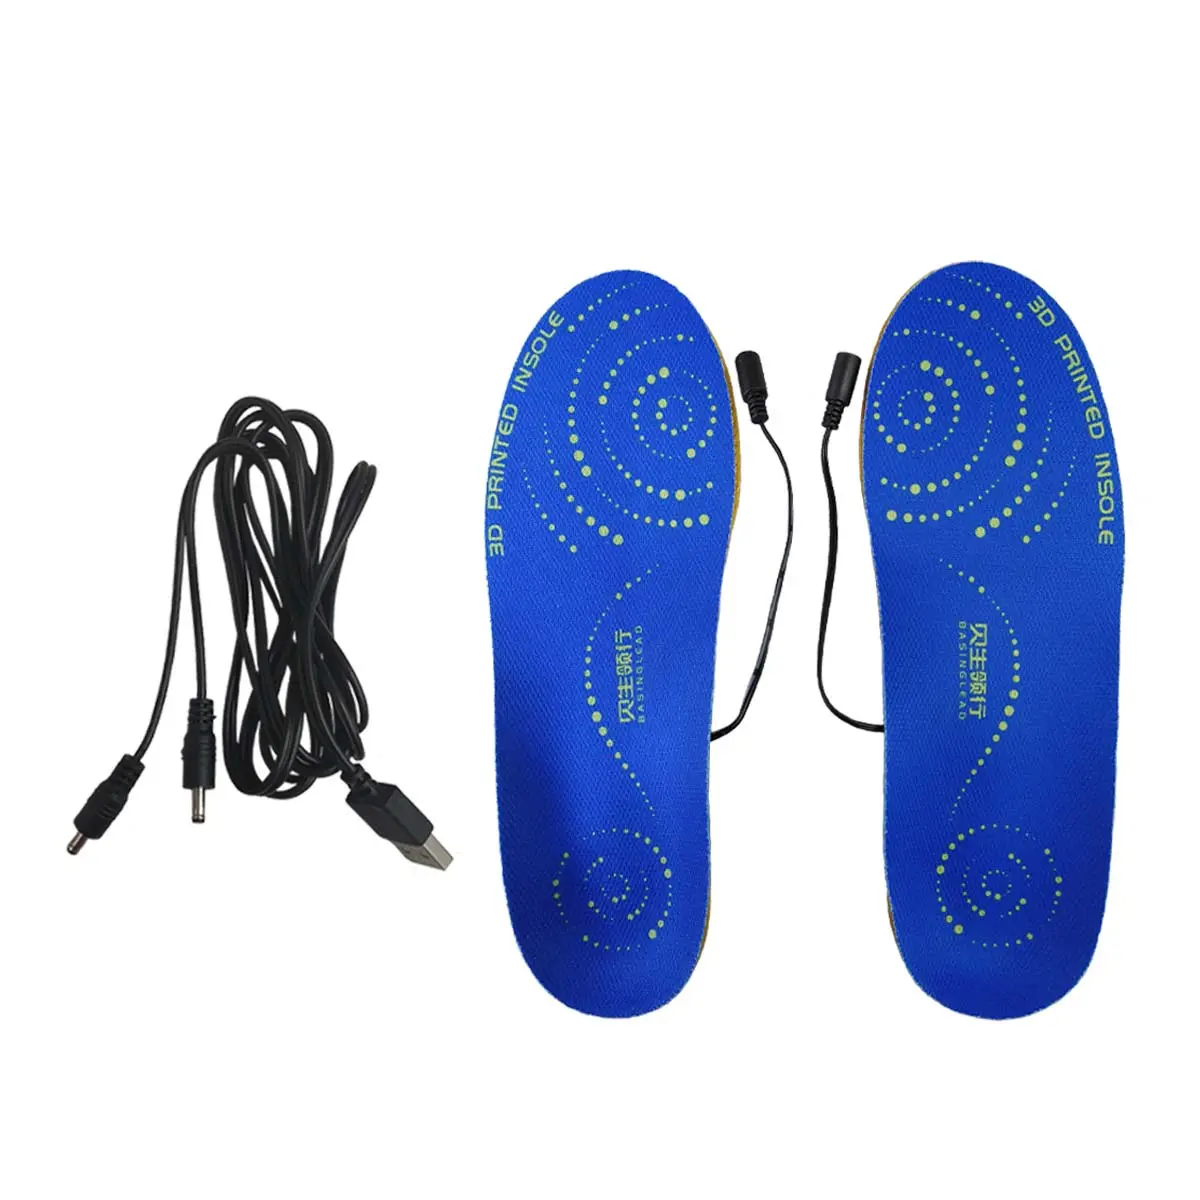 Electric heating insoles and heating insoles are used to keep the sole warm